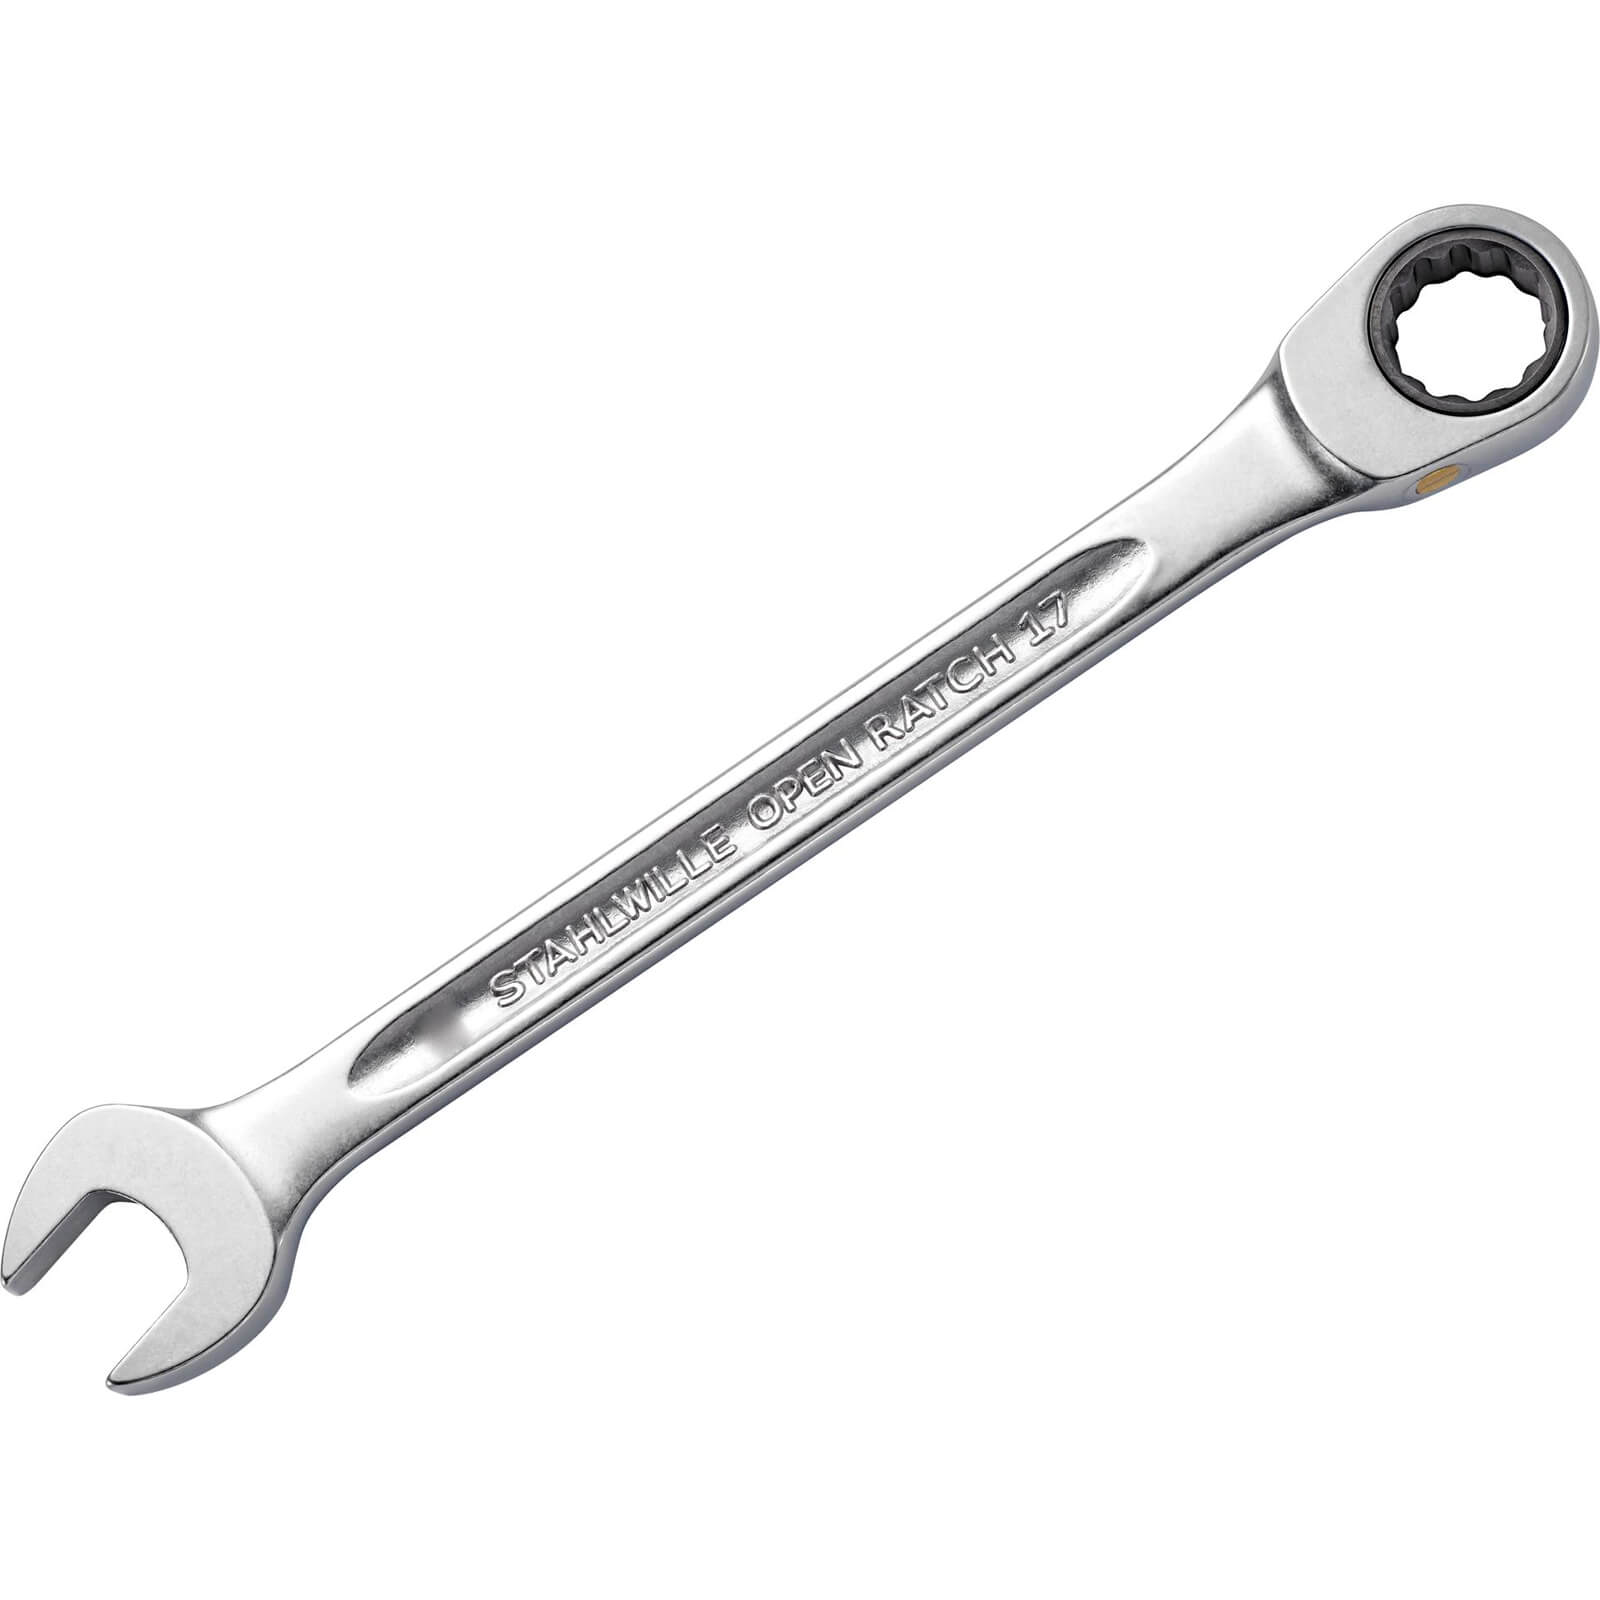 Image of Stahlwille 17F Ratchet Combination Spanner 17mm